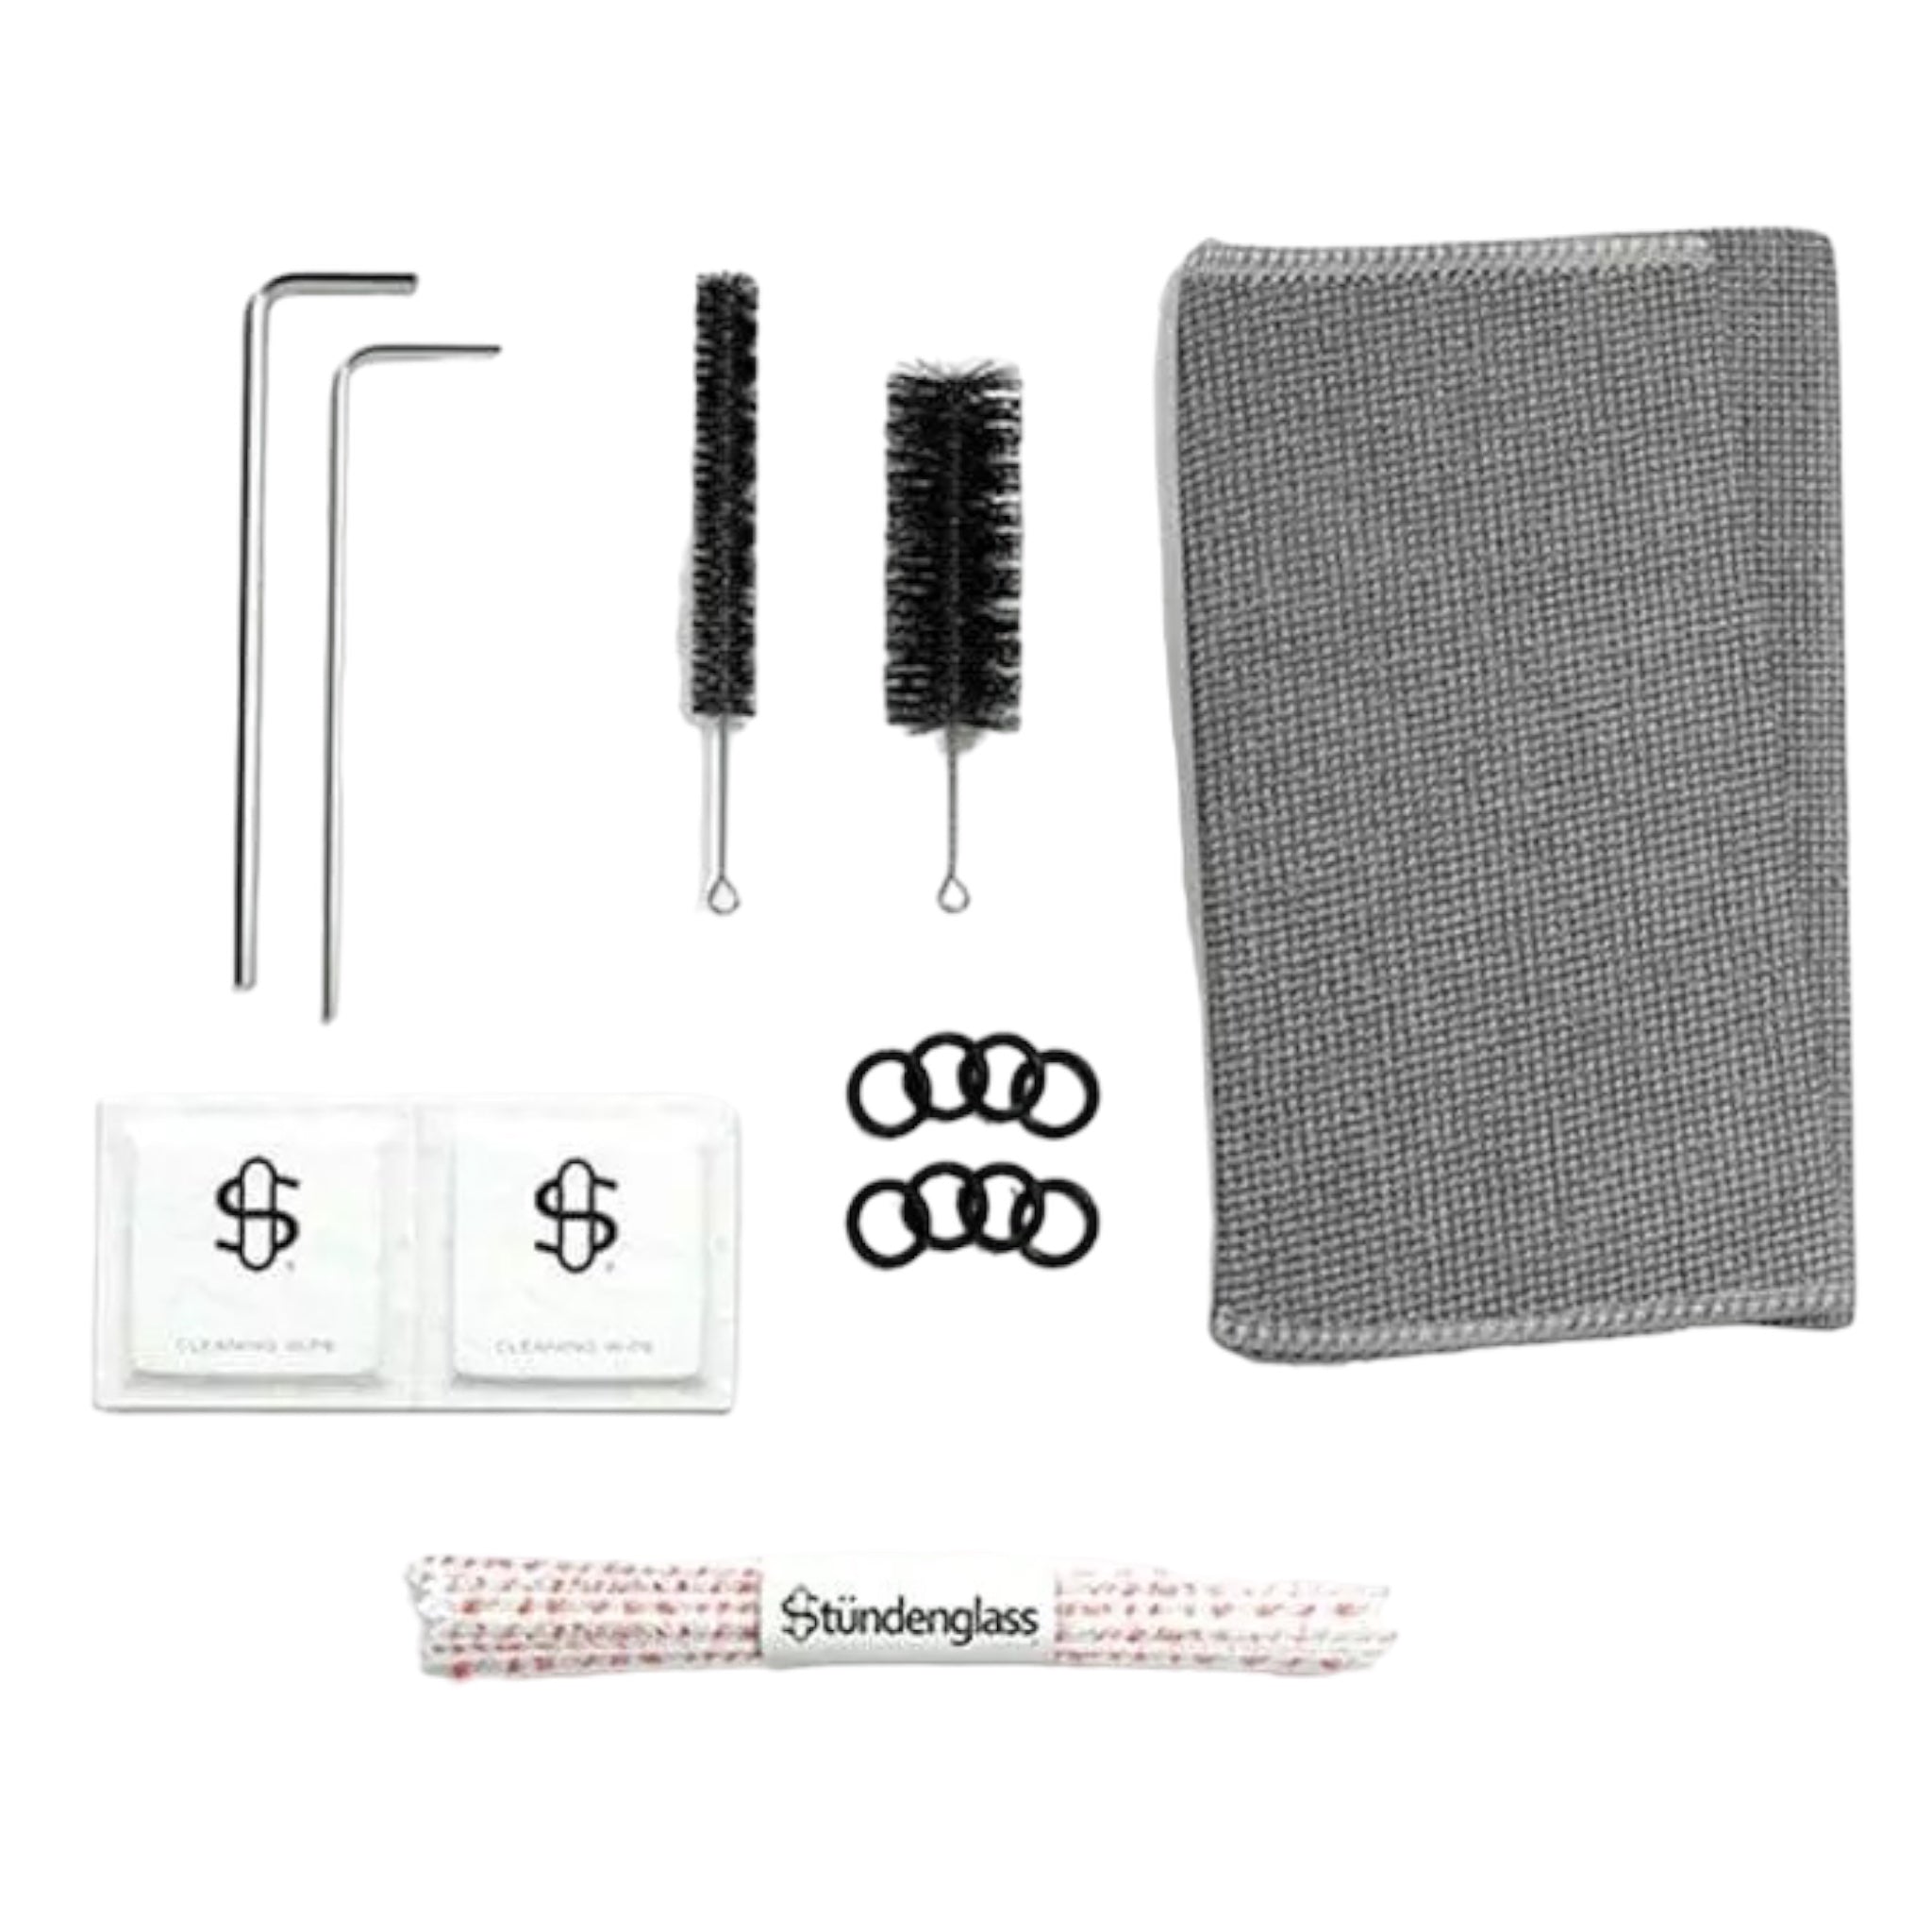 Cleaning Kit for Stundenglass Gravity Infuser Includes alcohol wipes, 2 nylon brushes, chenille stems, spare o-rings, cleaning towel and a hex key for removing the Mouthpiece Elbow.